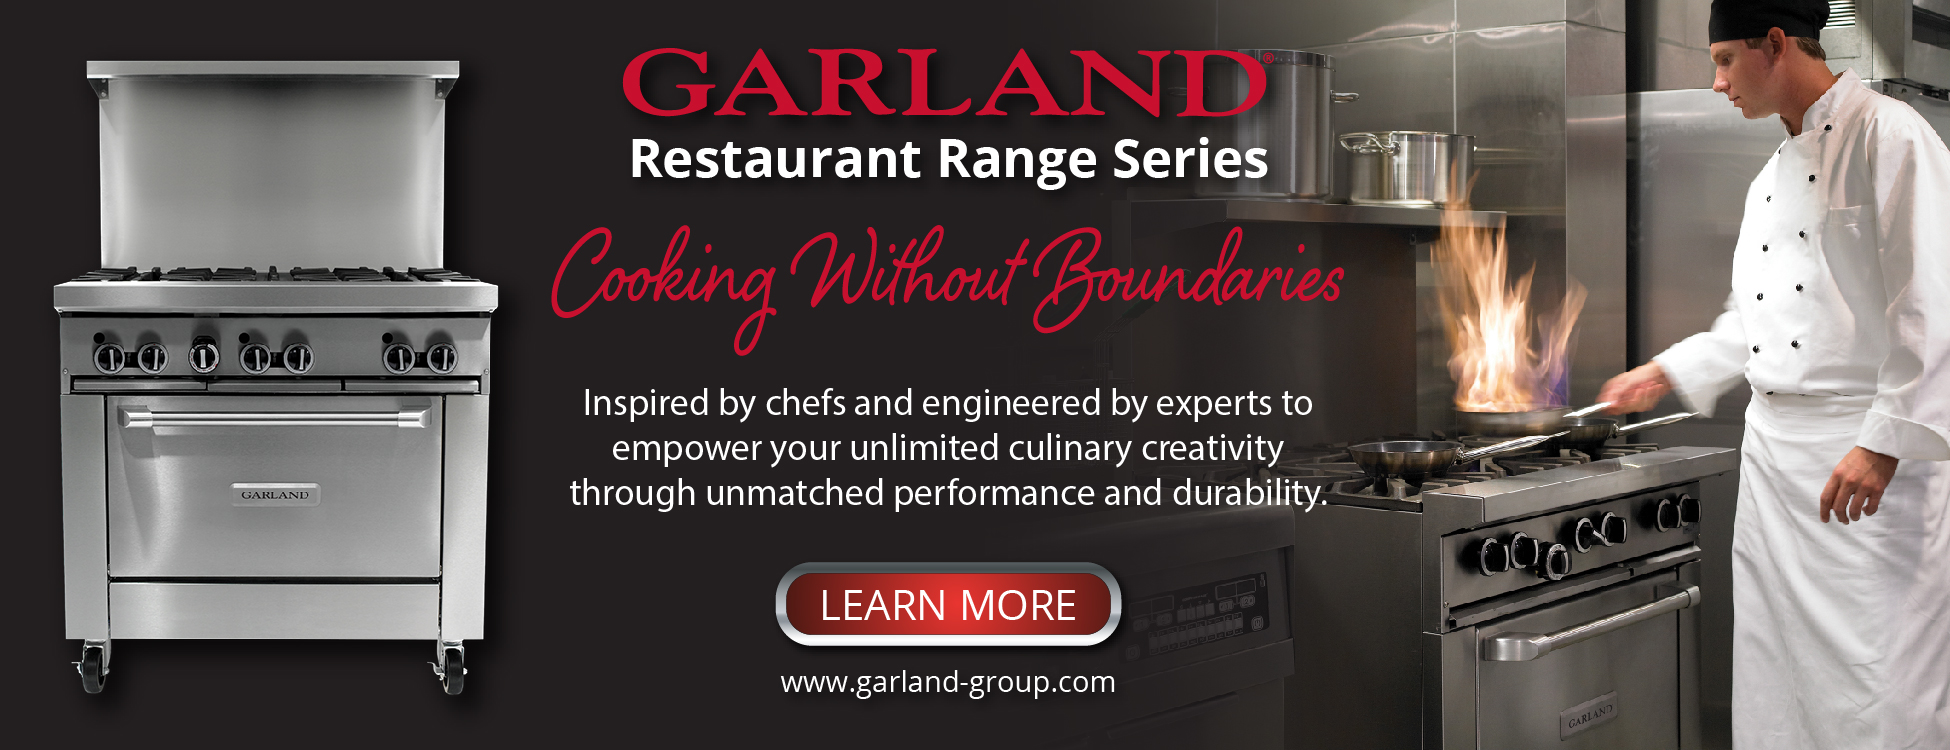 Garland Restaurant Range Series. Inspired by chefs and engineered by experts to empower your unlimited culinary creativity through unmatched performance and durability. Learn more.